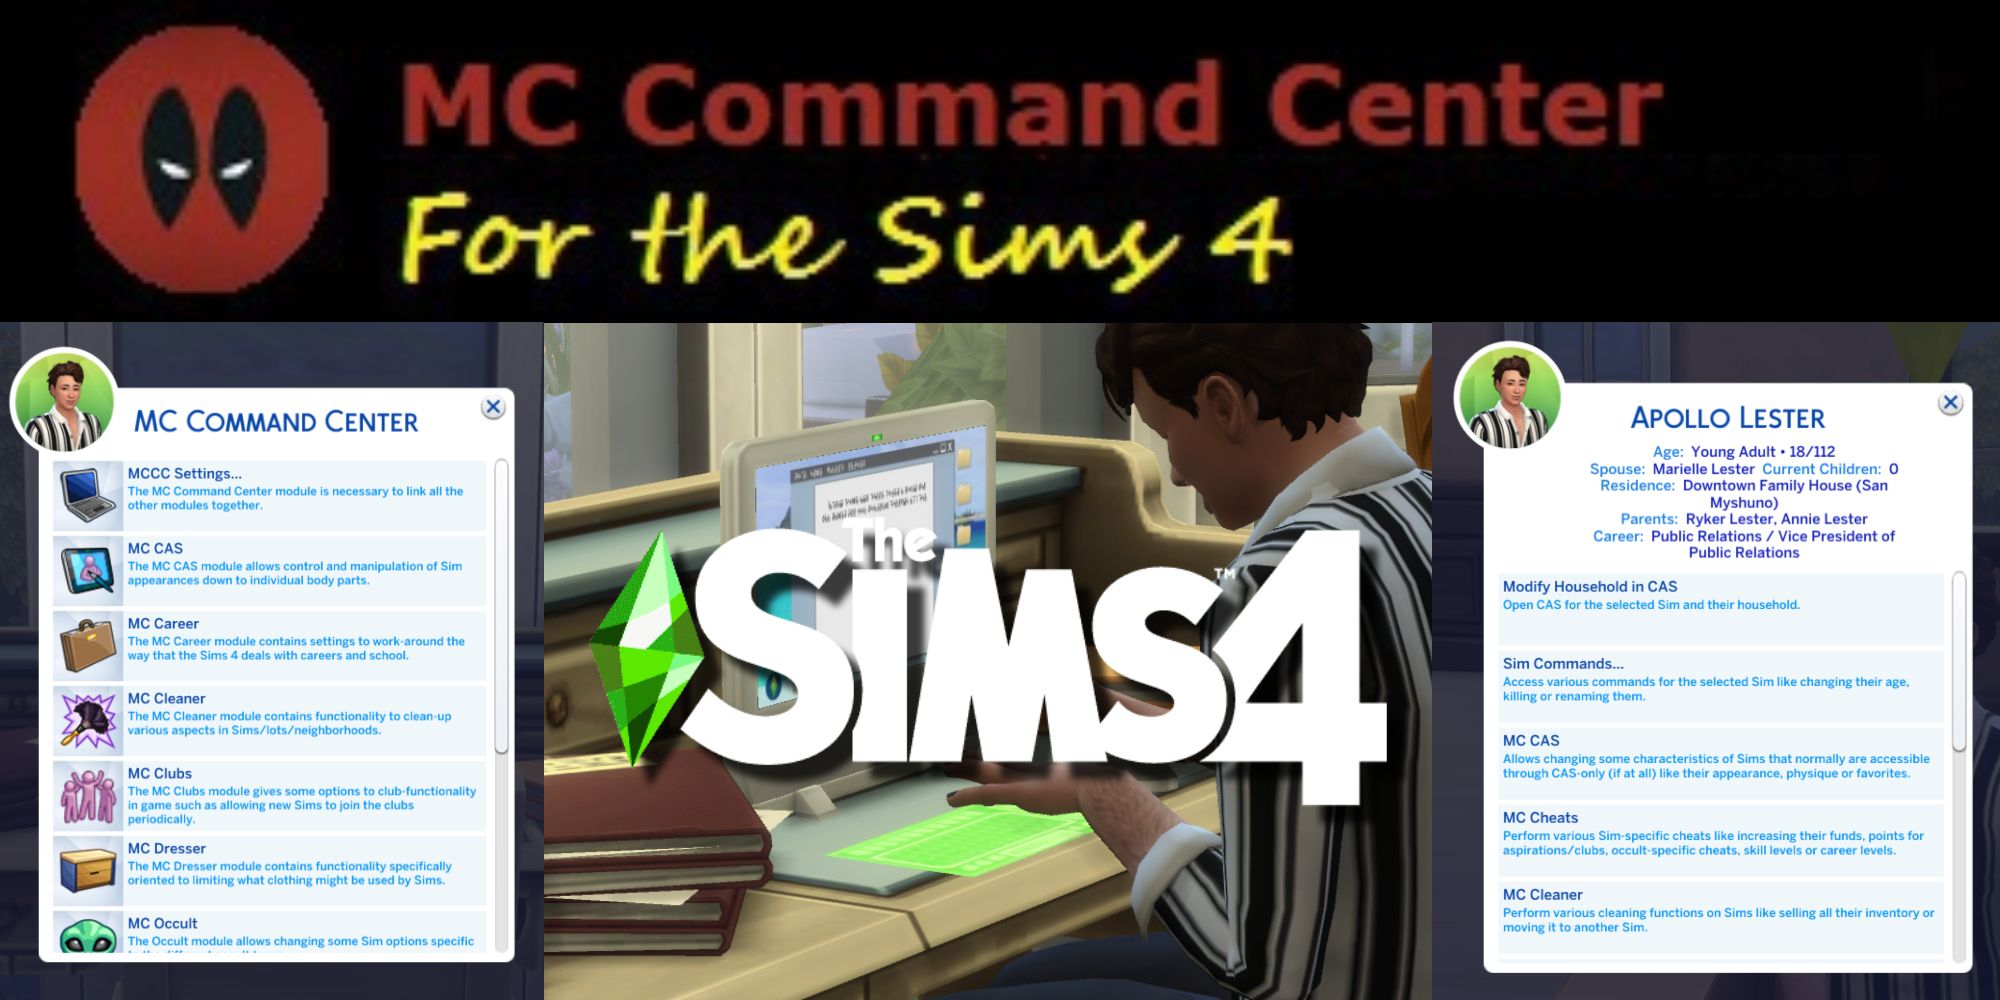 The Sims 4: Every Major Difference Between MC Command Center and MC Woohoo